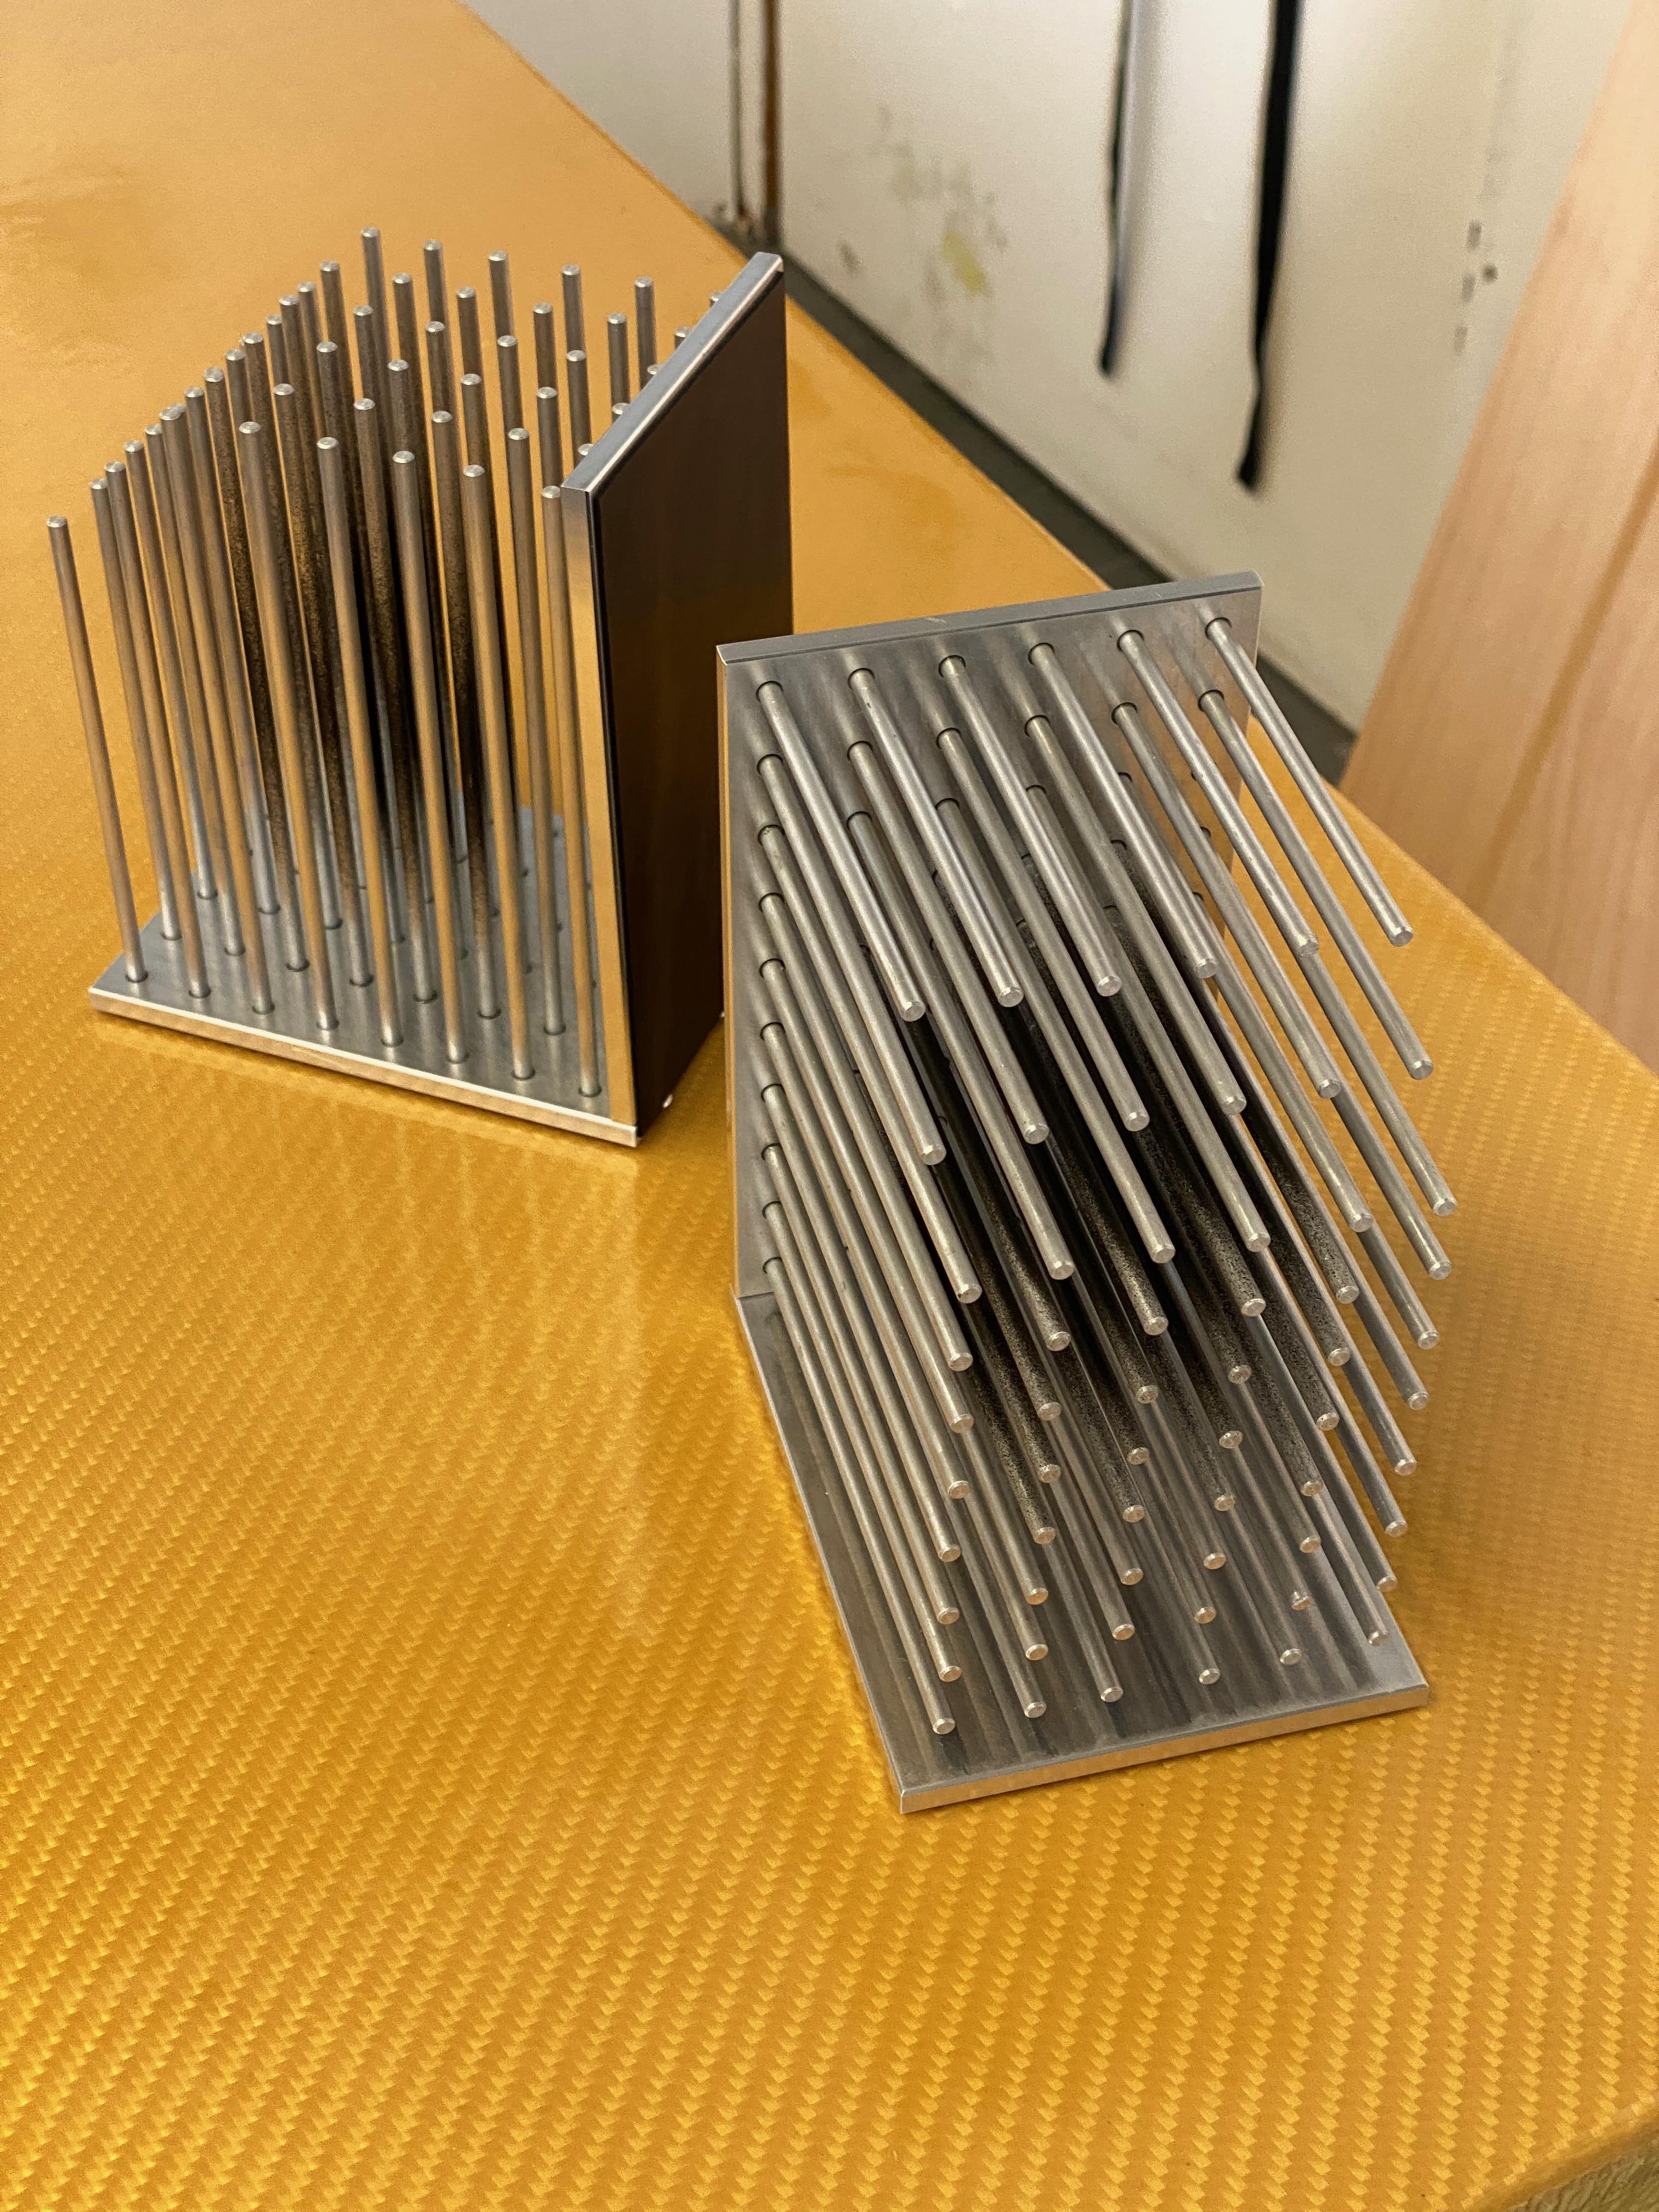 The bookends are a continuation of Tino Seubert's RCA graduation project The Colour of Air and were commissioned for Ma-tt-er's book launch at London Design Festival 2018. They are inspired by the aesthetics of air filters. Made from milled raw